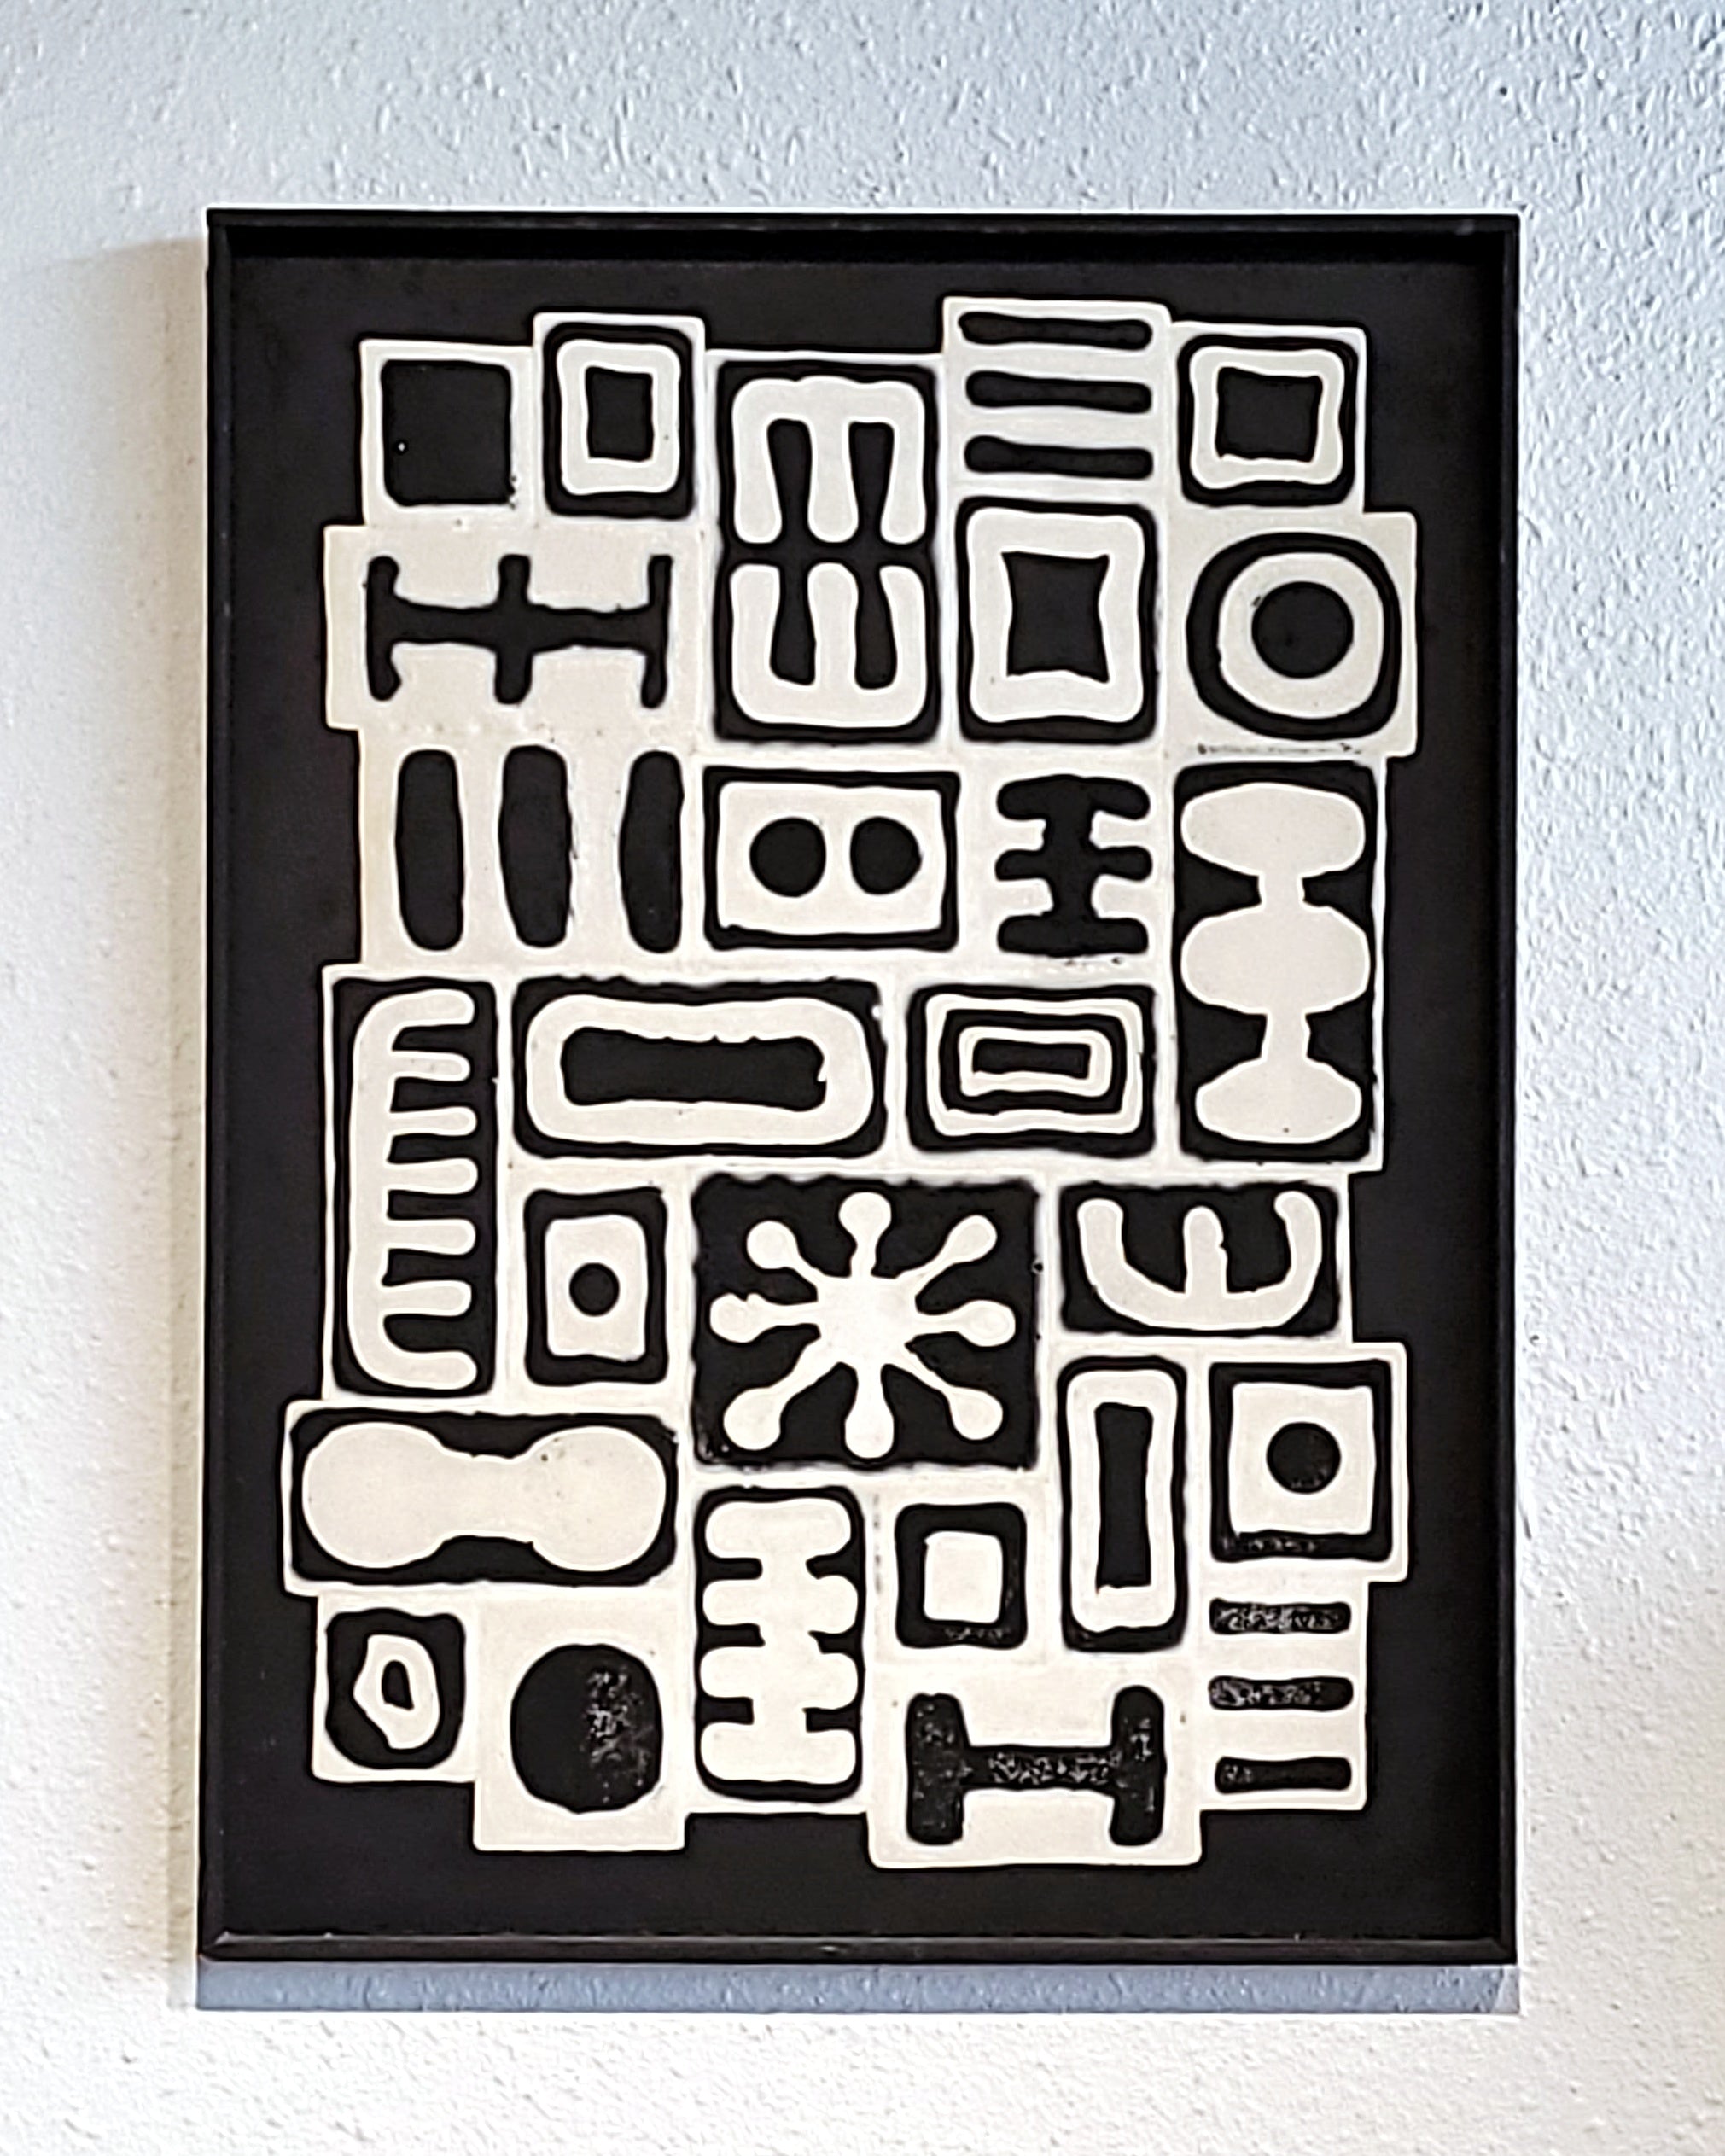 EARLY ’60s MIXED MEDIA GLYPHIC RELIEF PAINTING BY GWEN LESEMANN